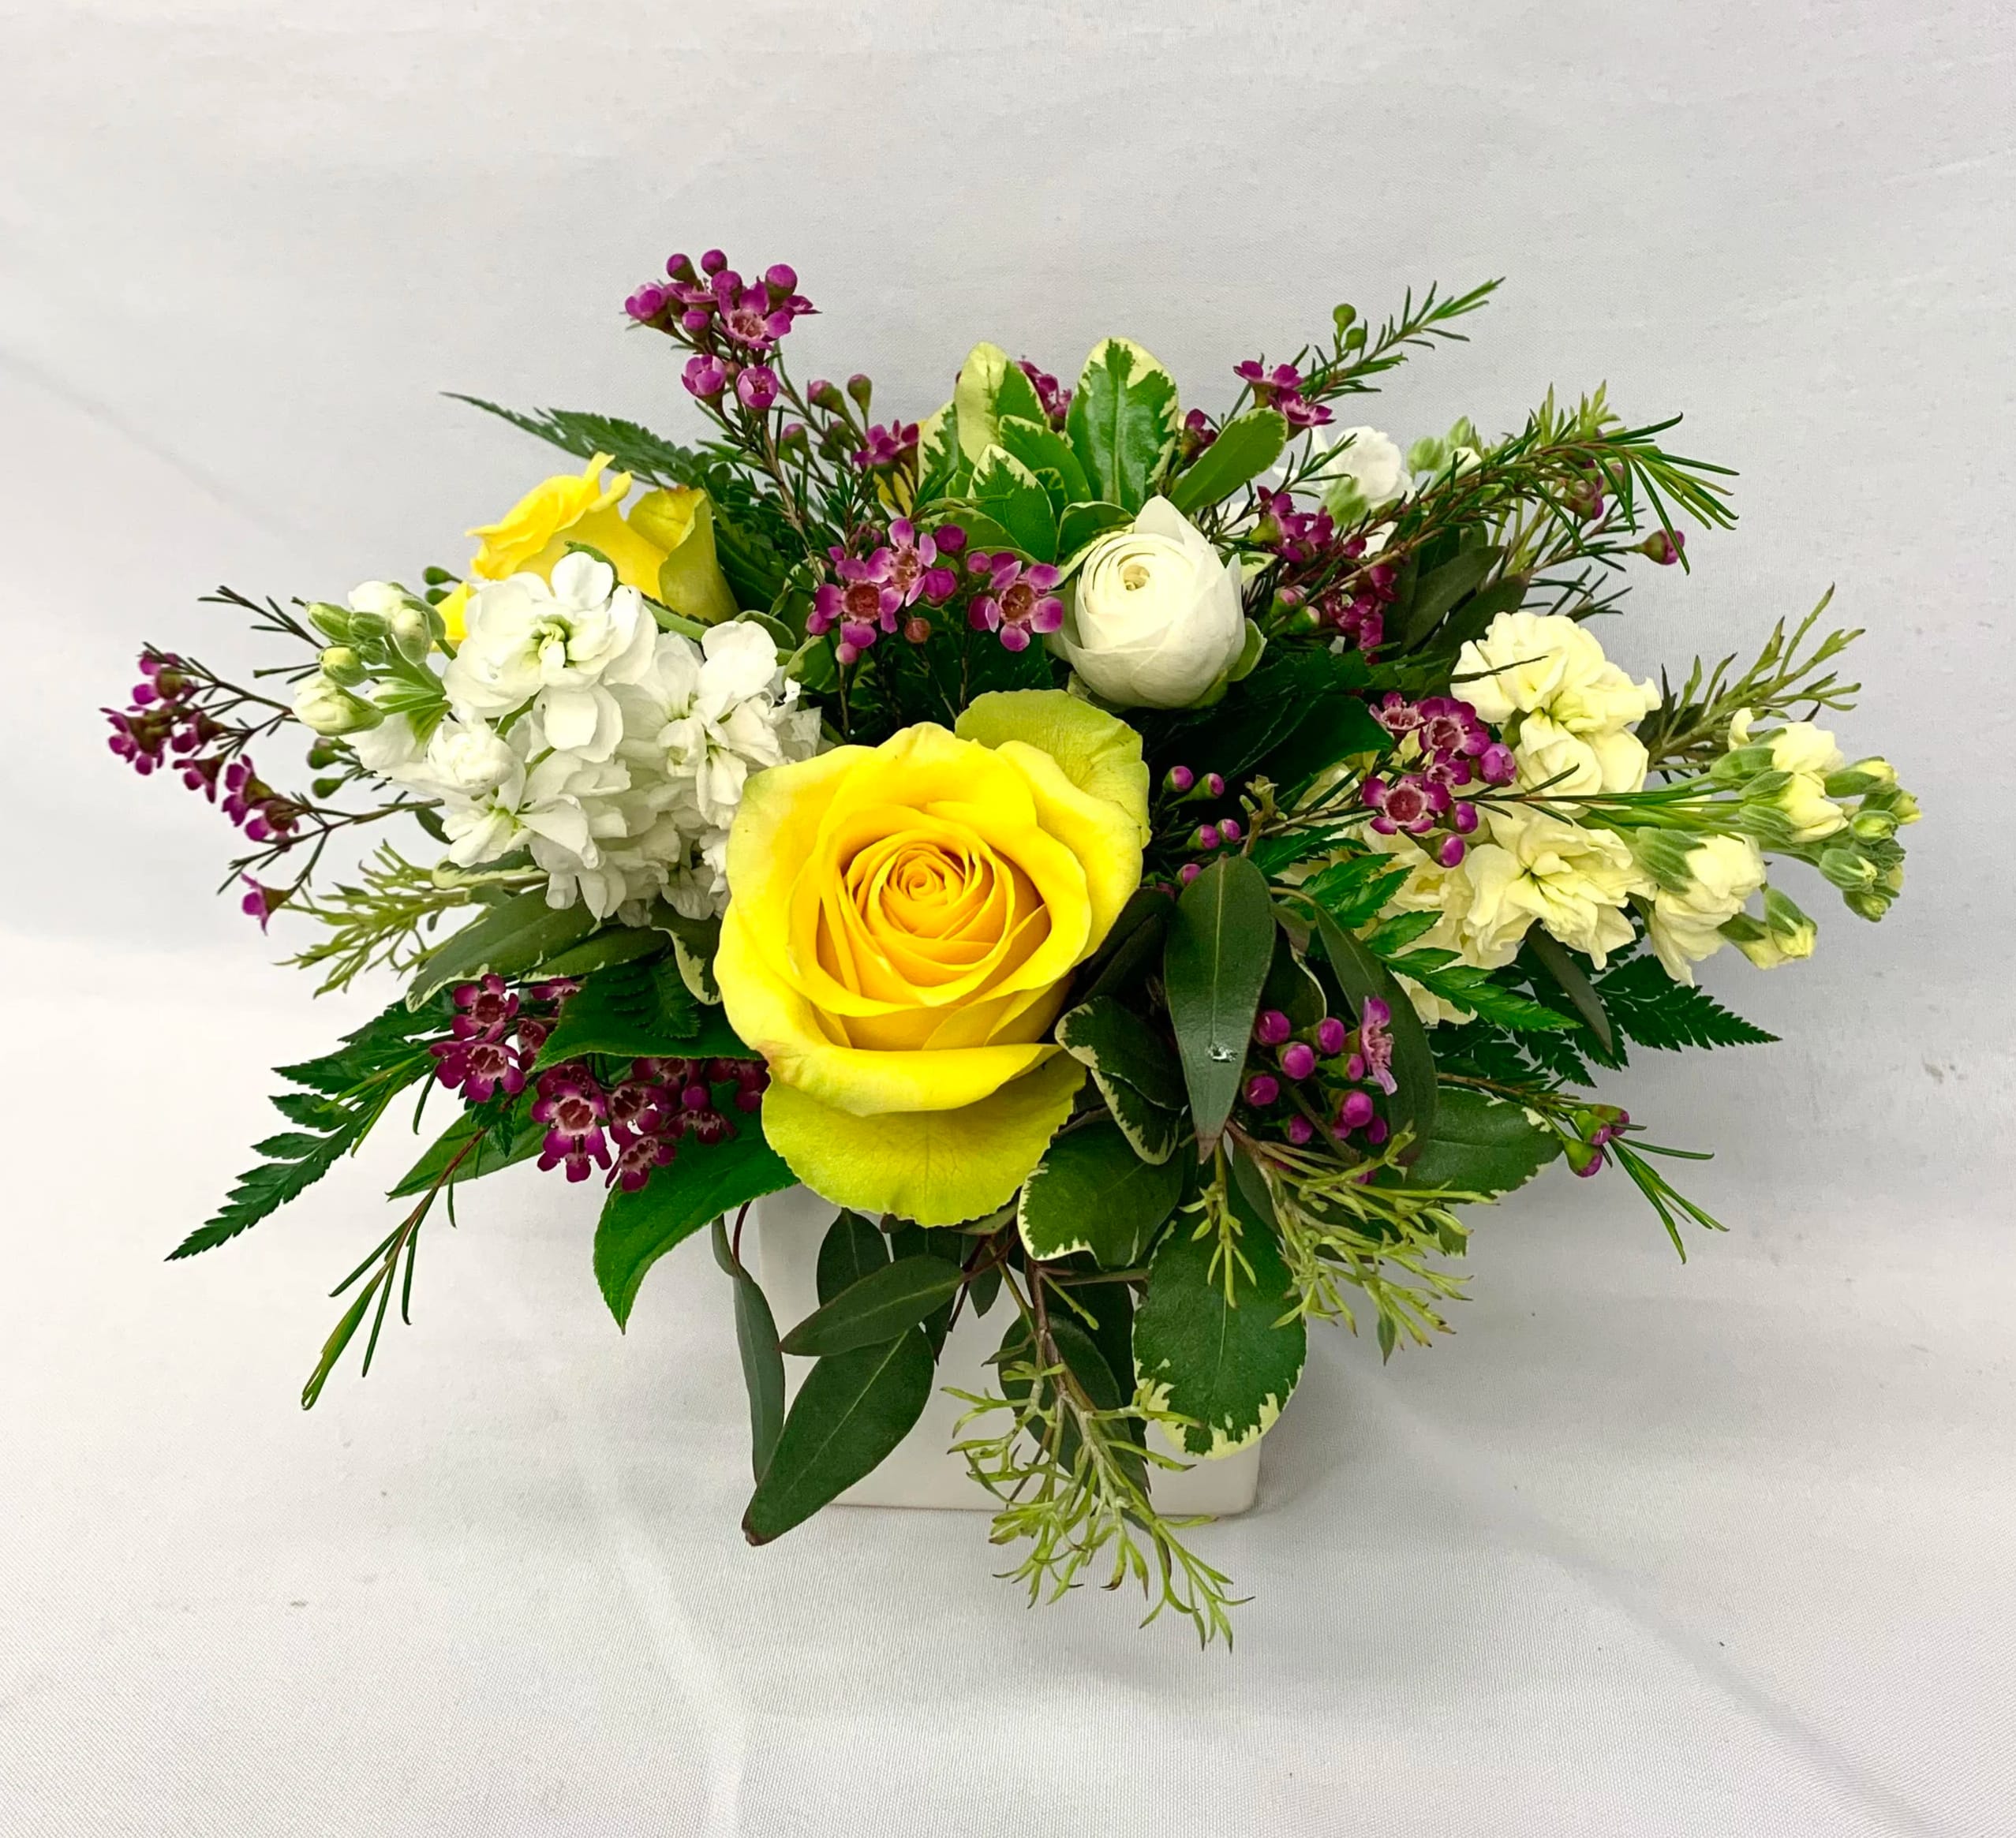 Kiss of the Seasons - Selecting from the freshest, in-season blooms, this design features seasonal favorites with bright and cheerful tones in a white ceramic container.